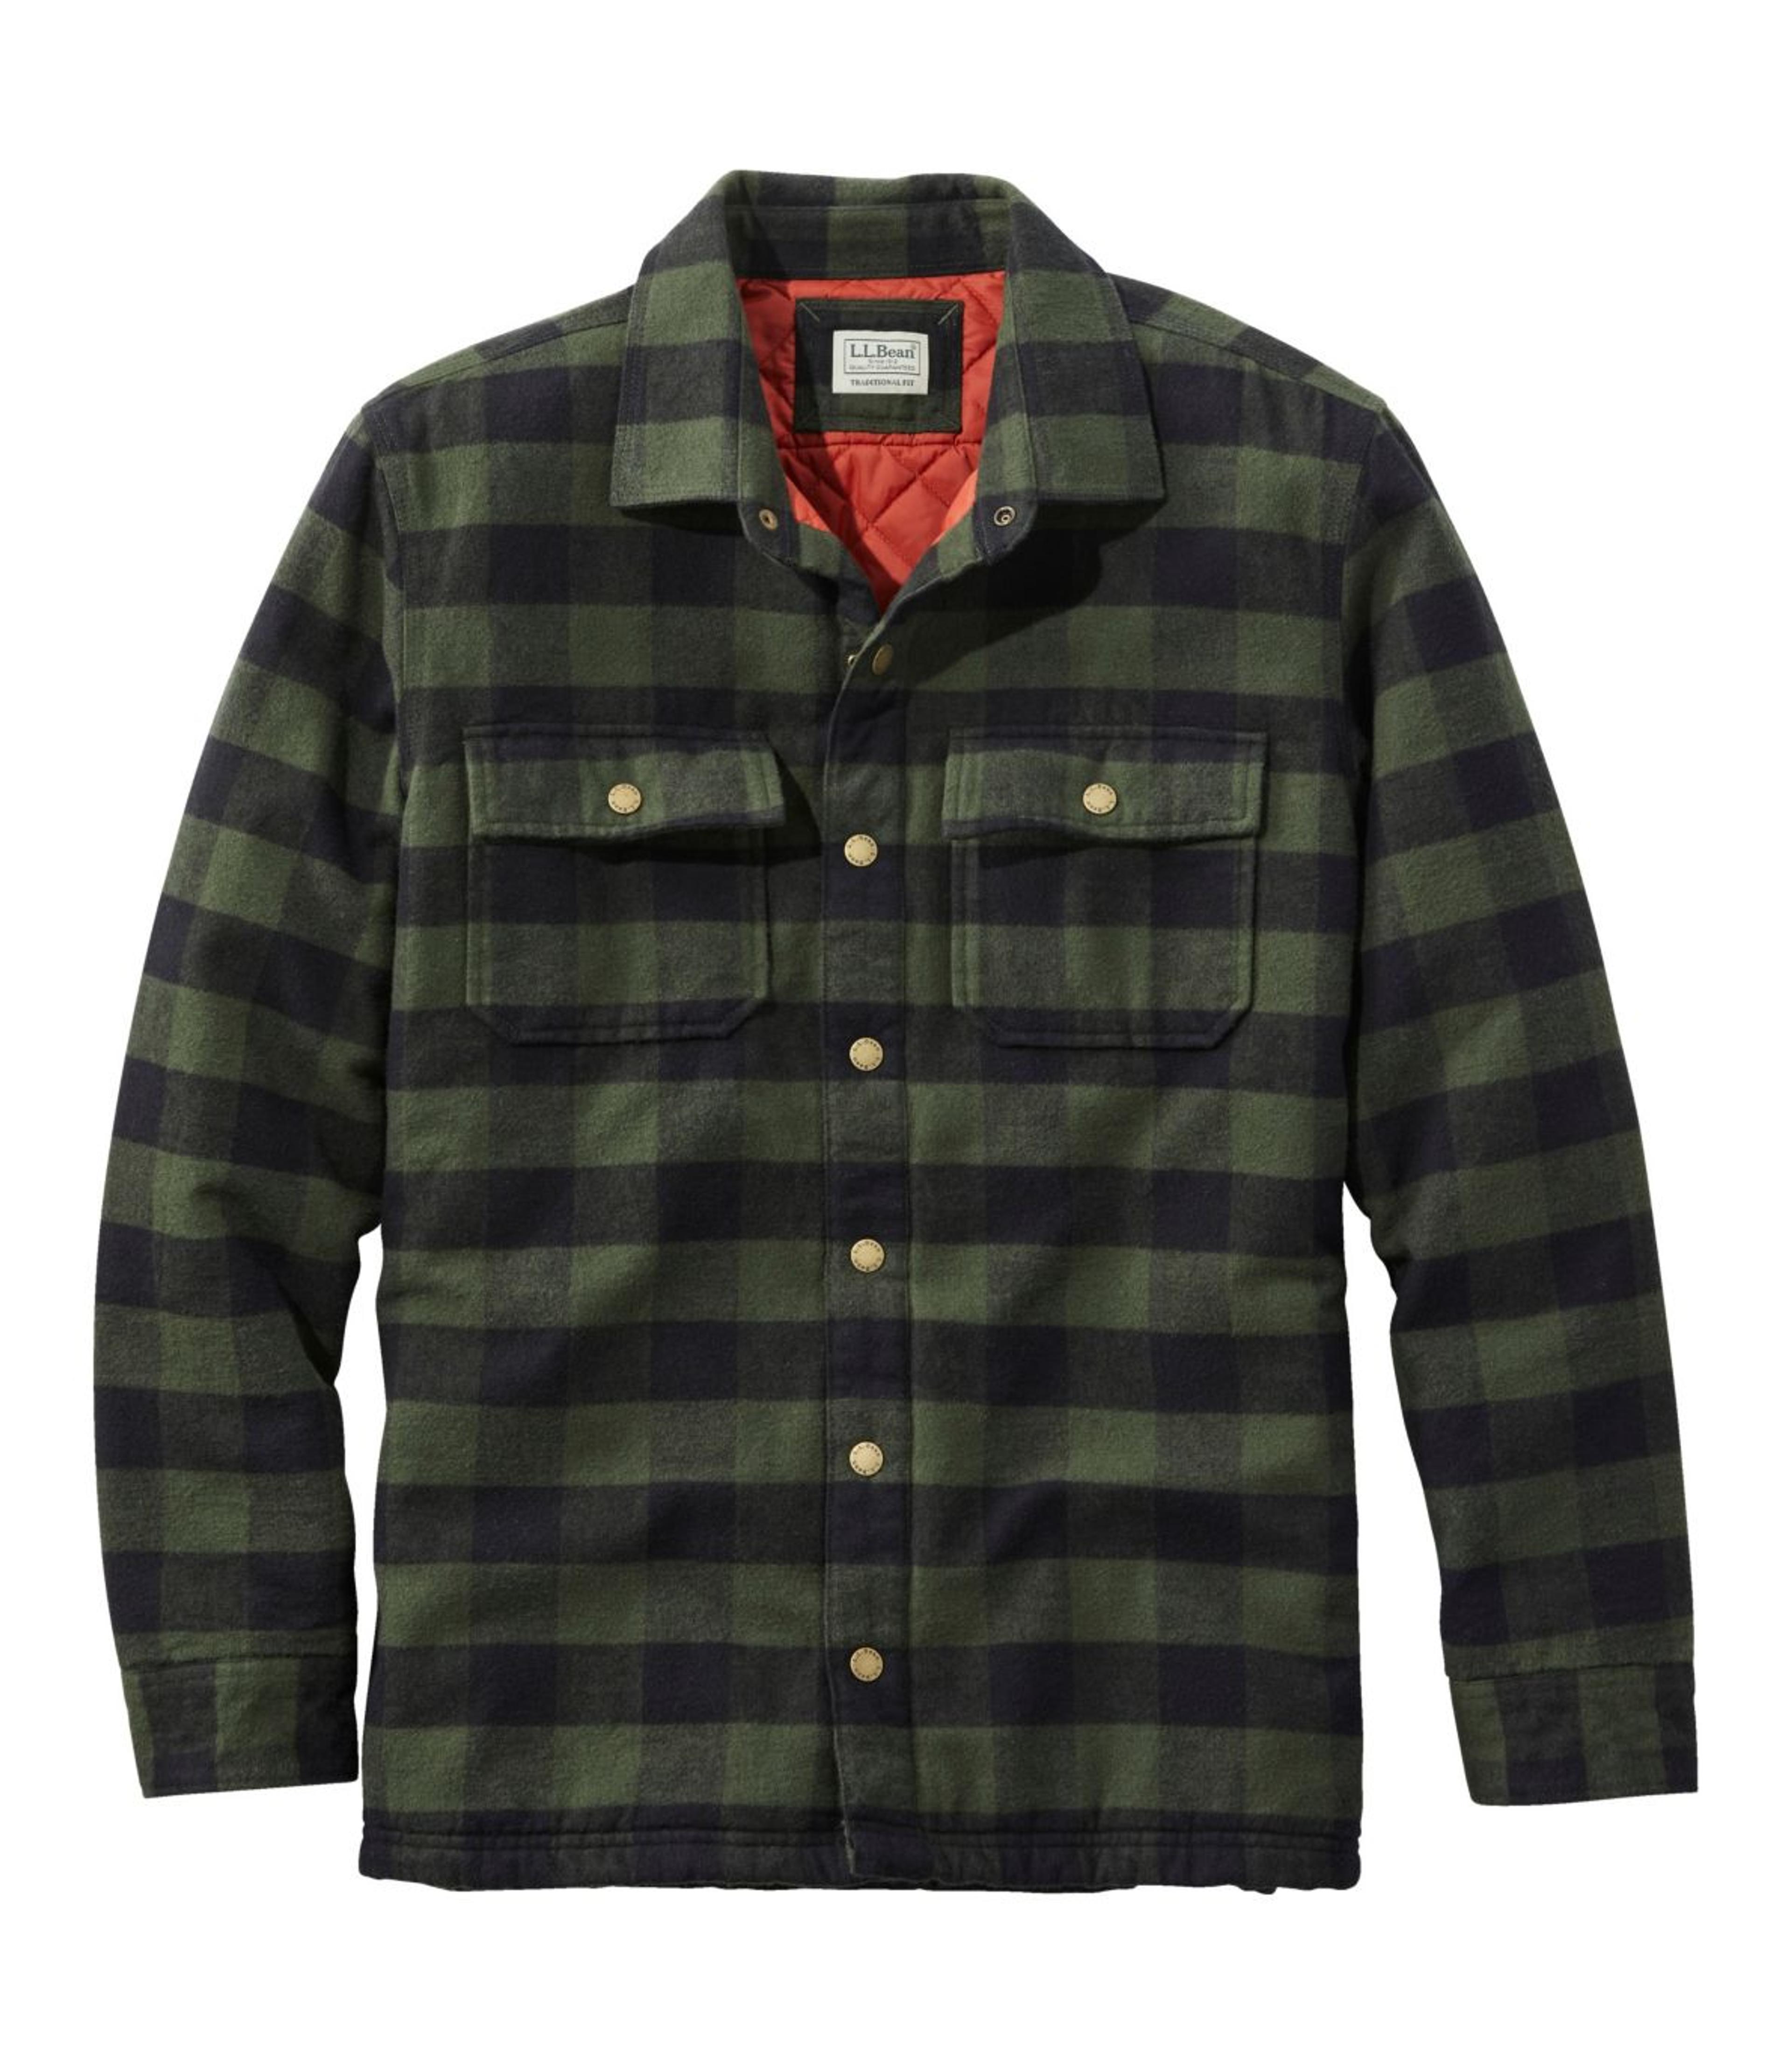 Men's PrimaLoft Lined Chamois Shirt Jac, Traditional Untucked Fit, Plaid at L.L. Bean